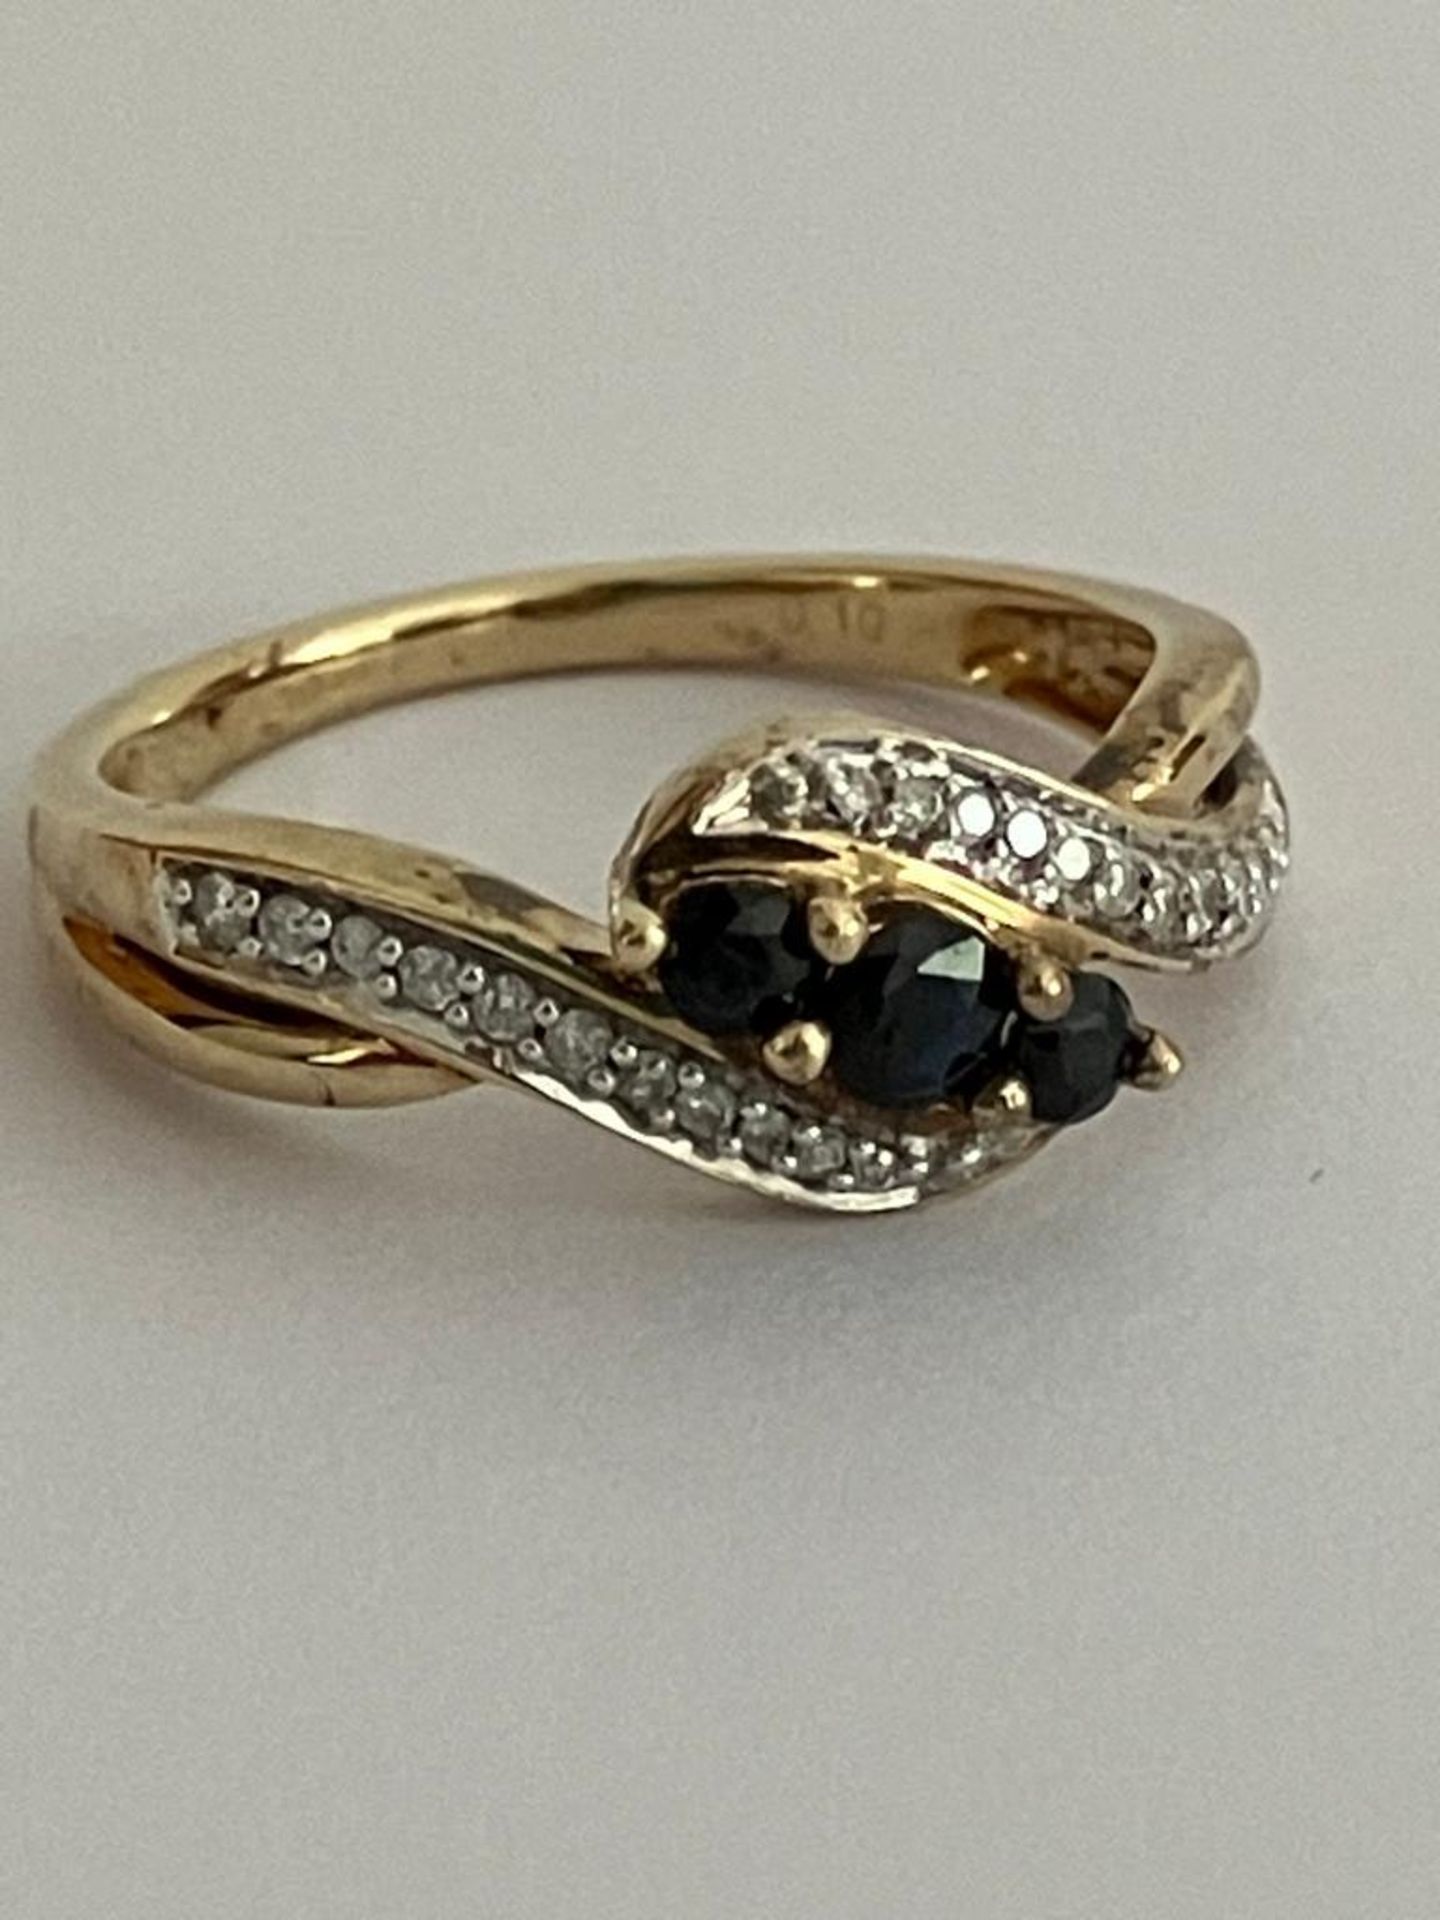 9 carat GOLD, DIAMOND and SAPPHIRE RING, Crossover design with attractive split shoulder detail.